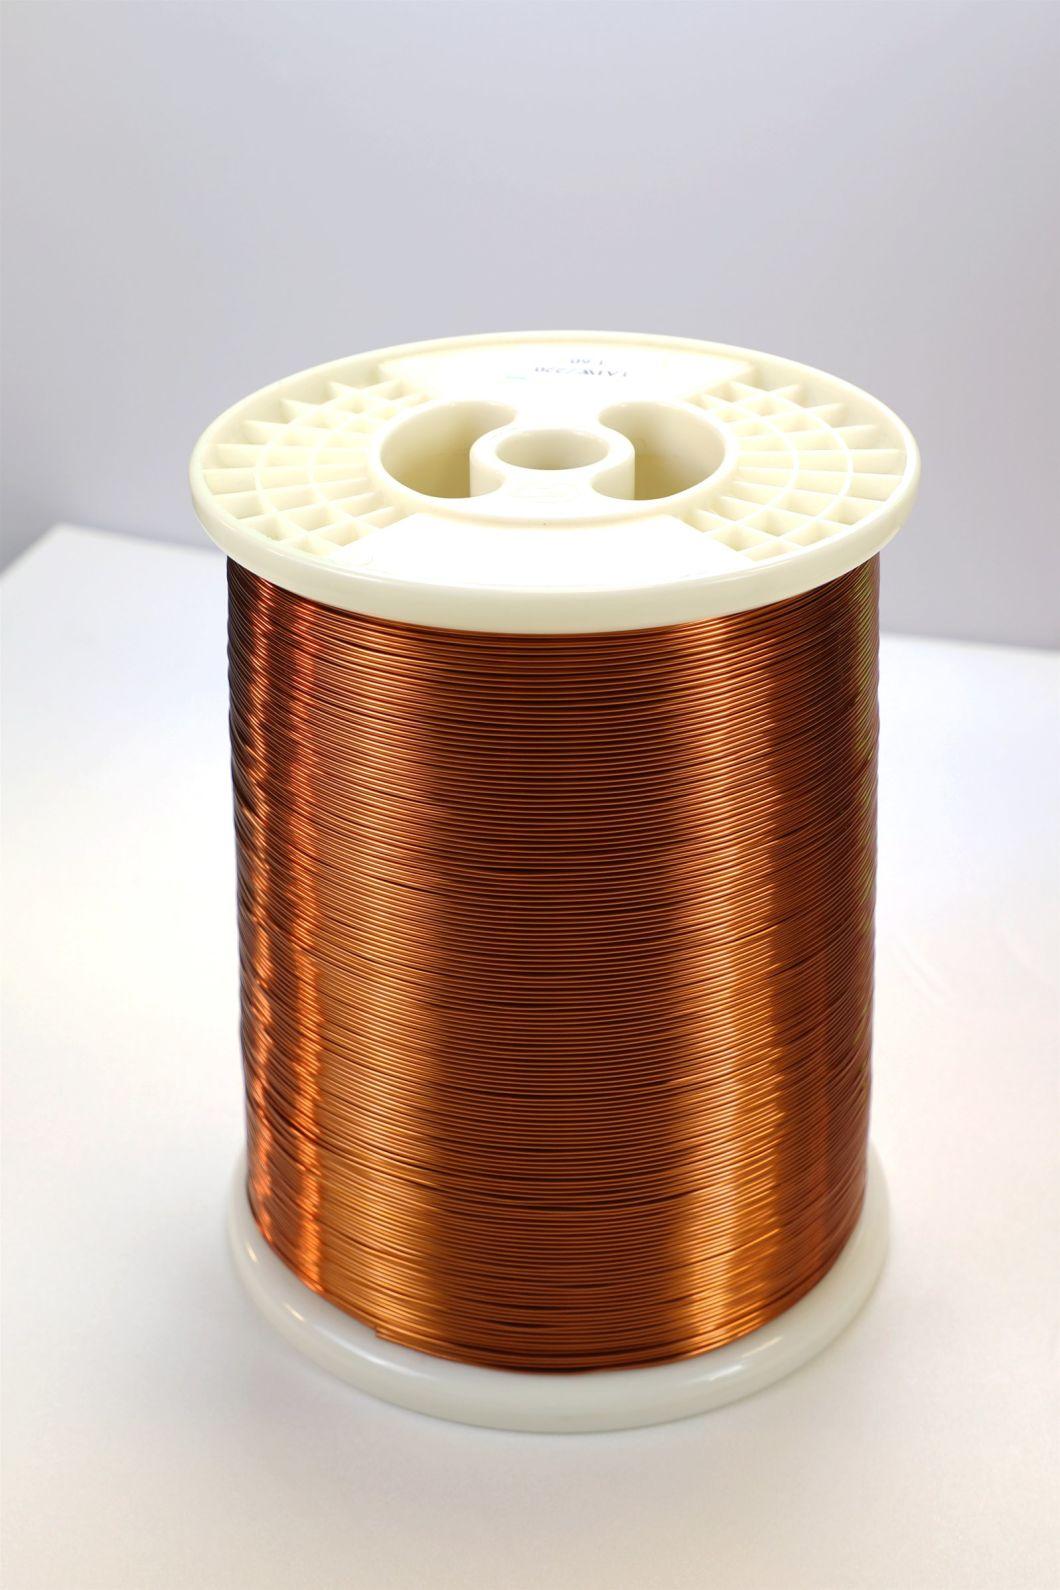 Polyester Series Enameled Copper Wire (PEW/155)